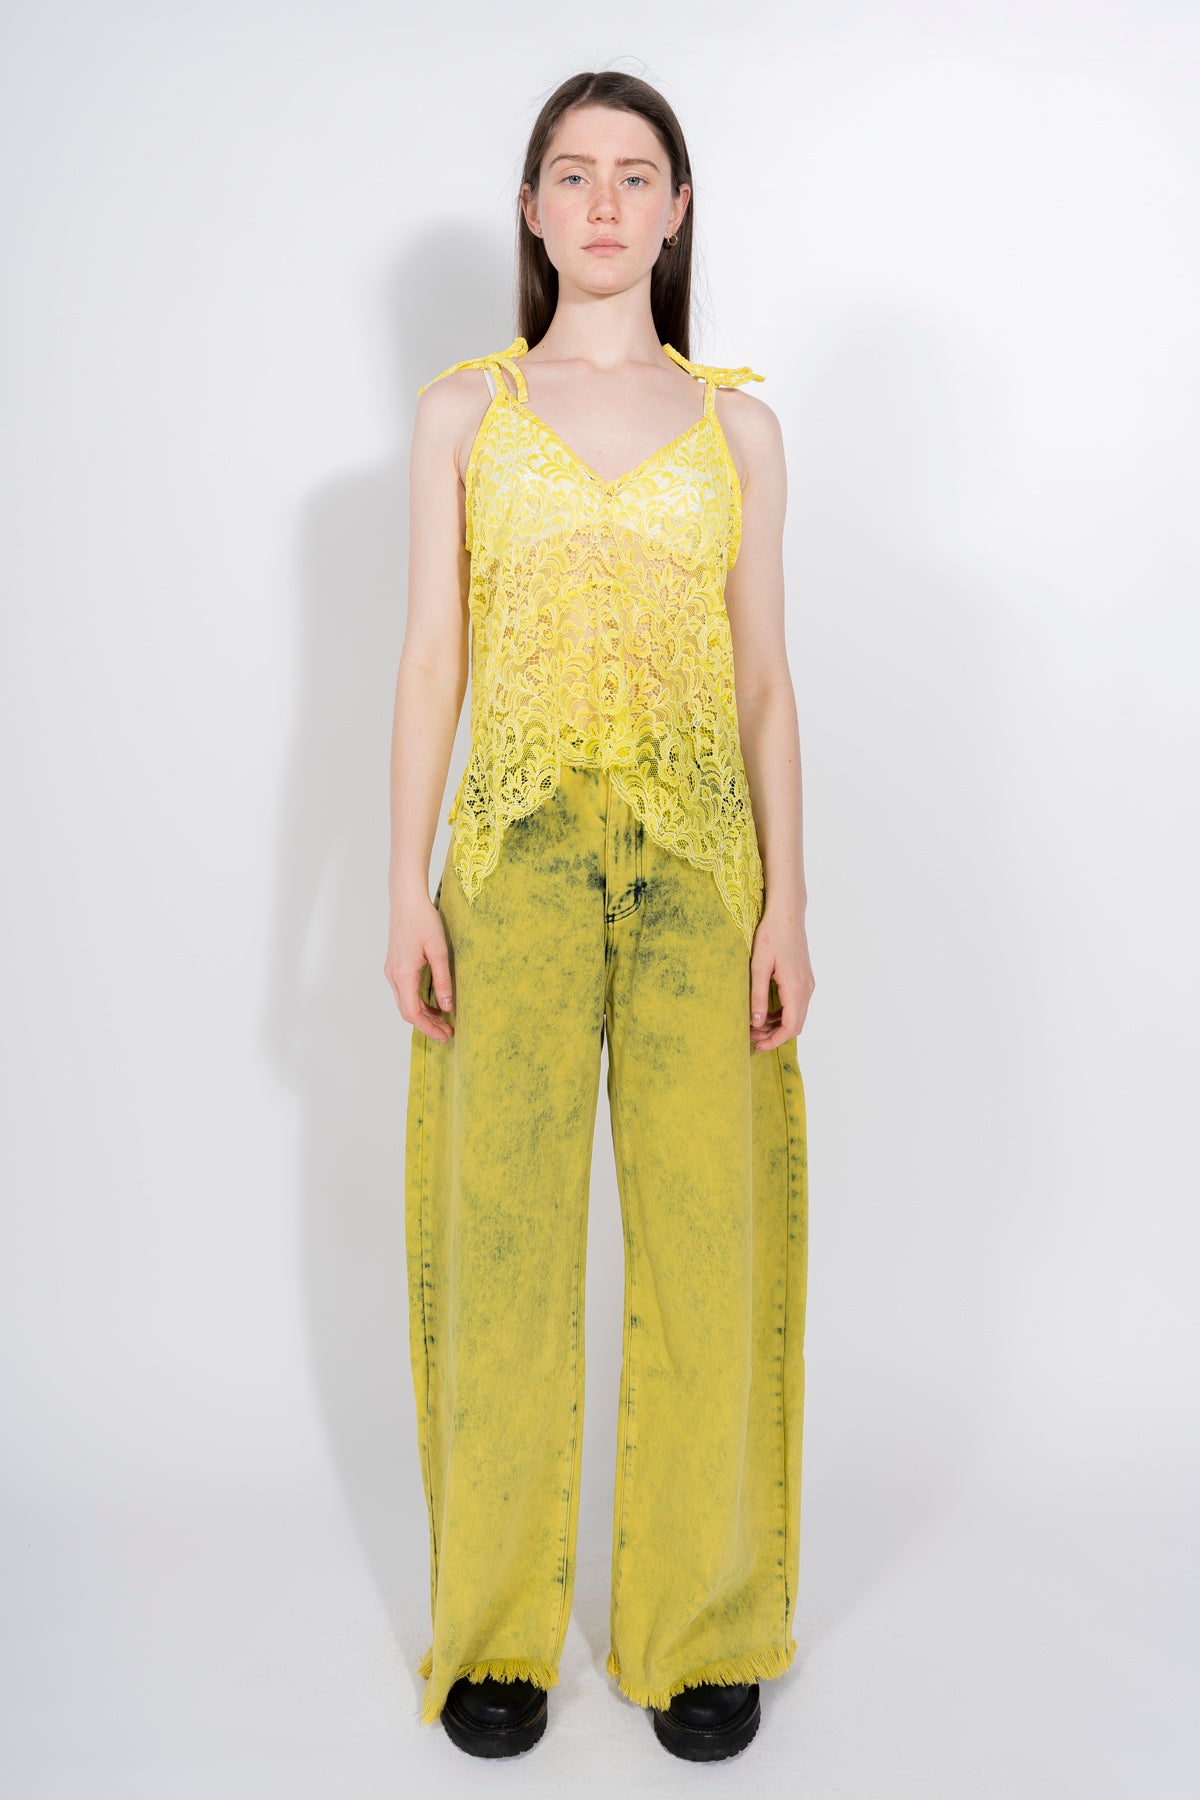 LACE SLIP TOP IN YELLOW marques almeida